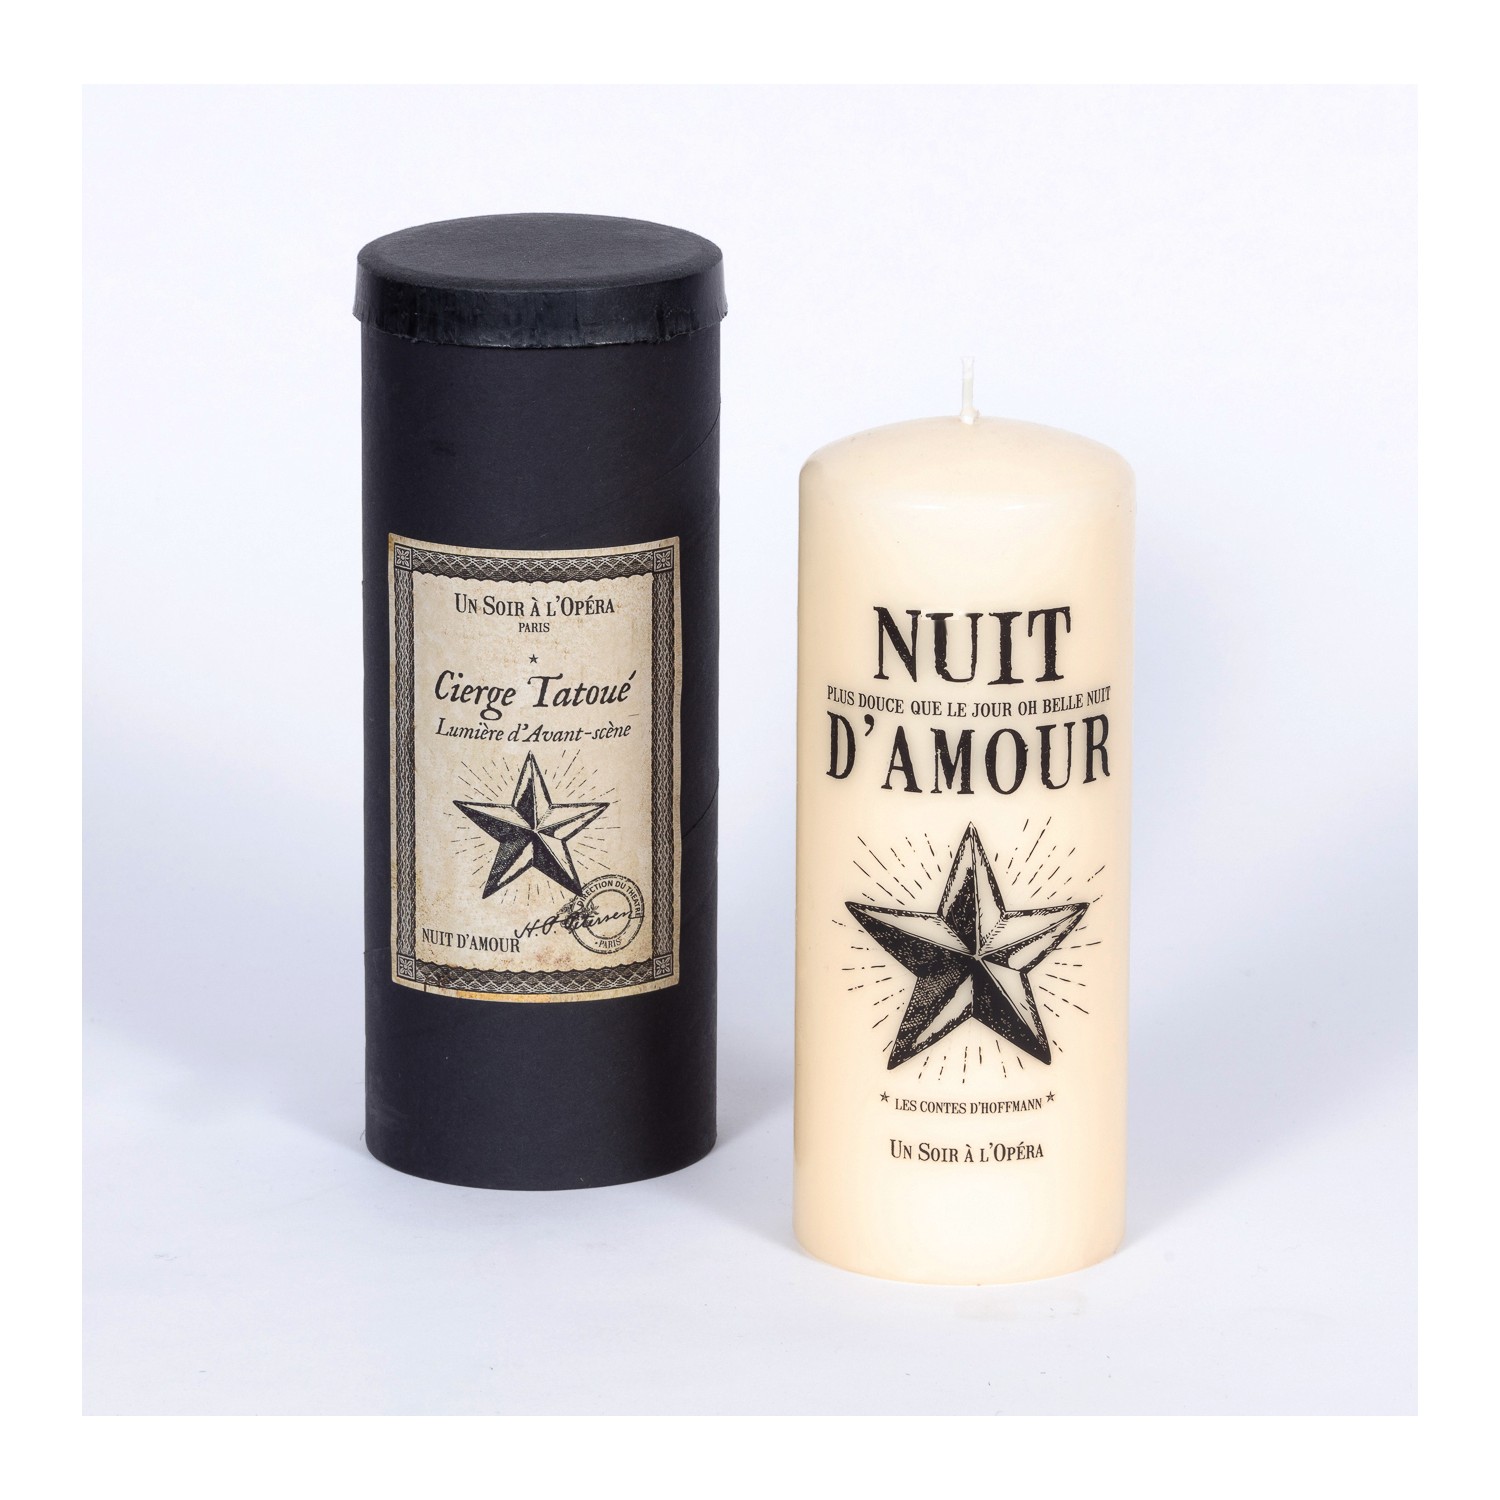 Tattooed pillar candle - Ivory - THE TALES OF HOFFMANN